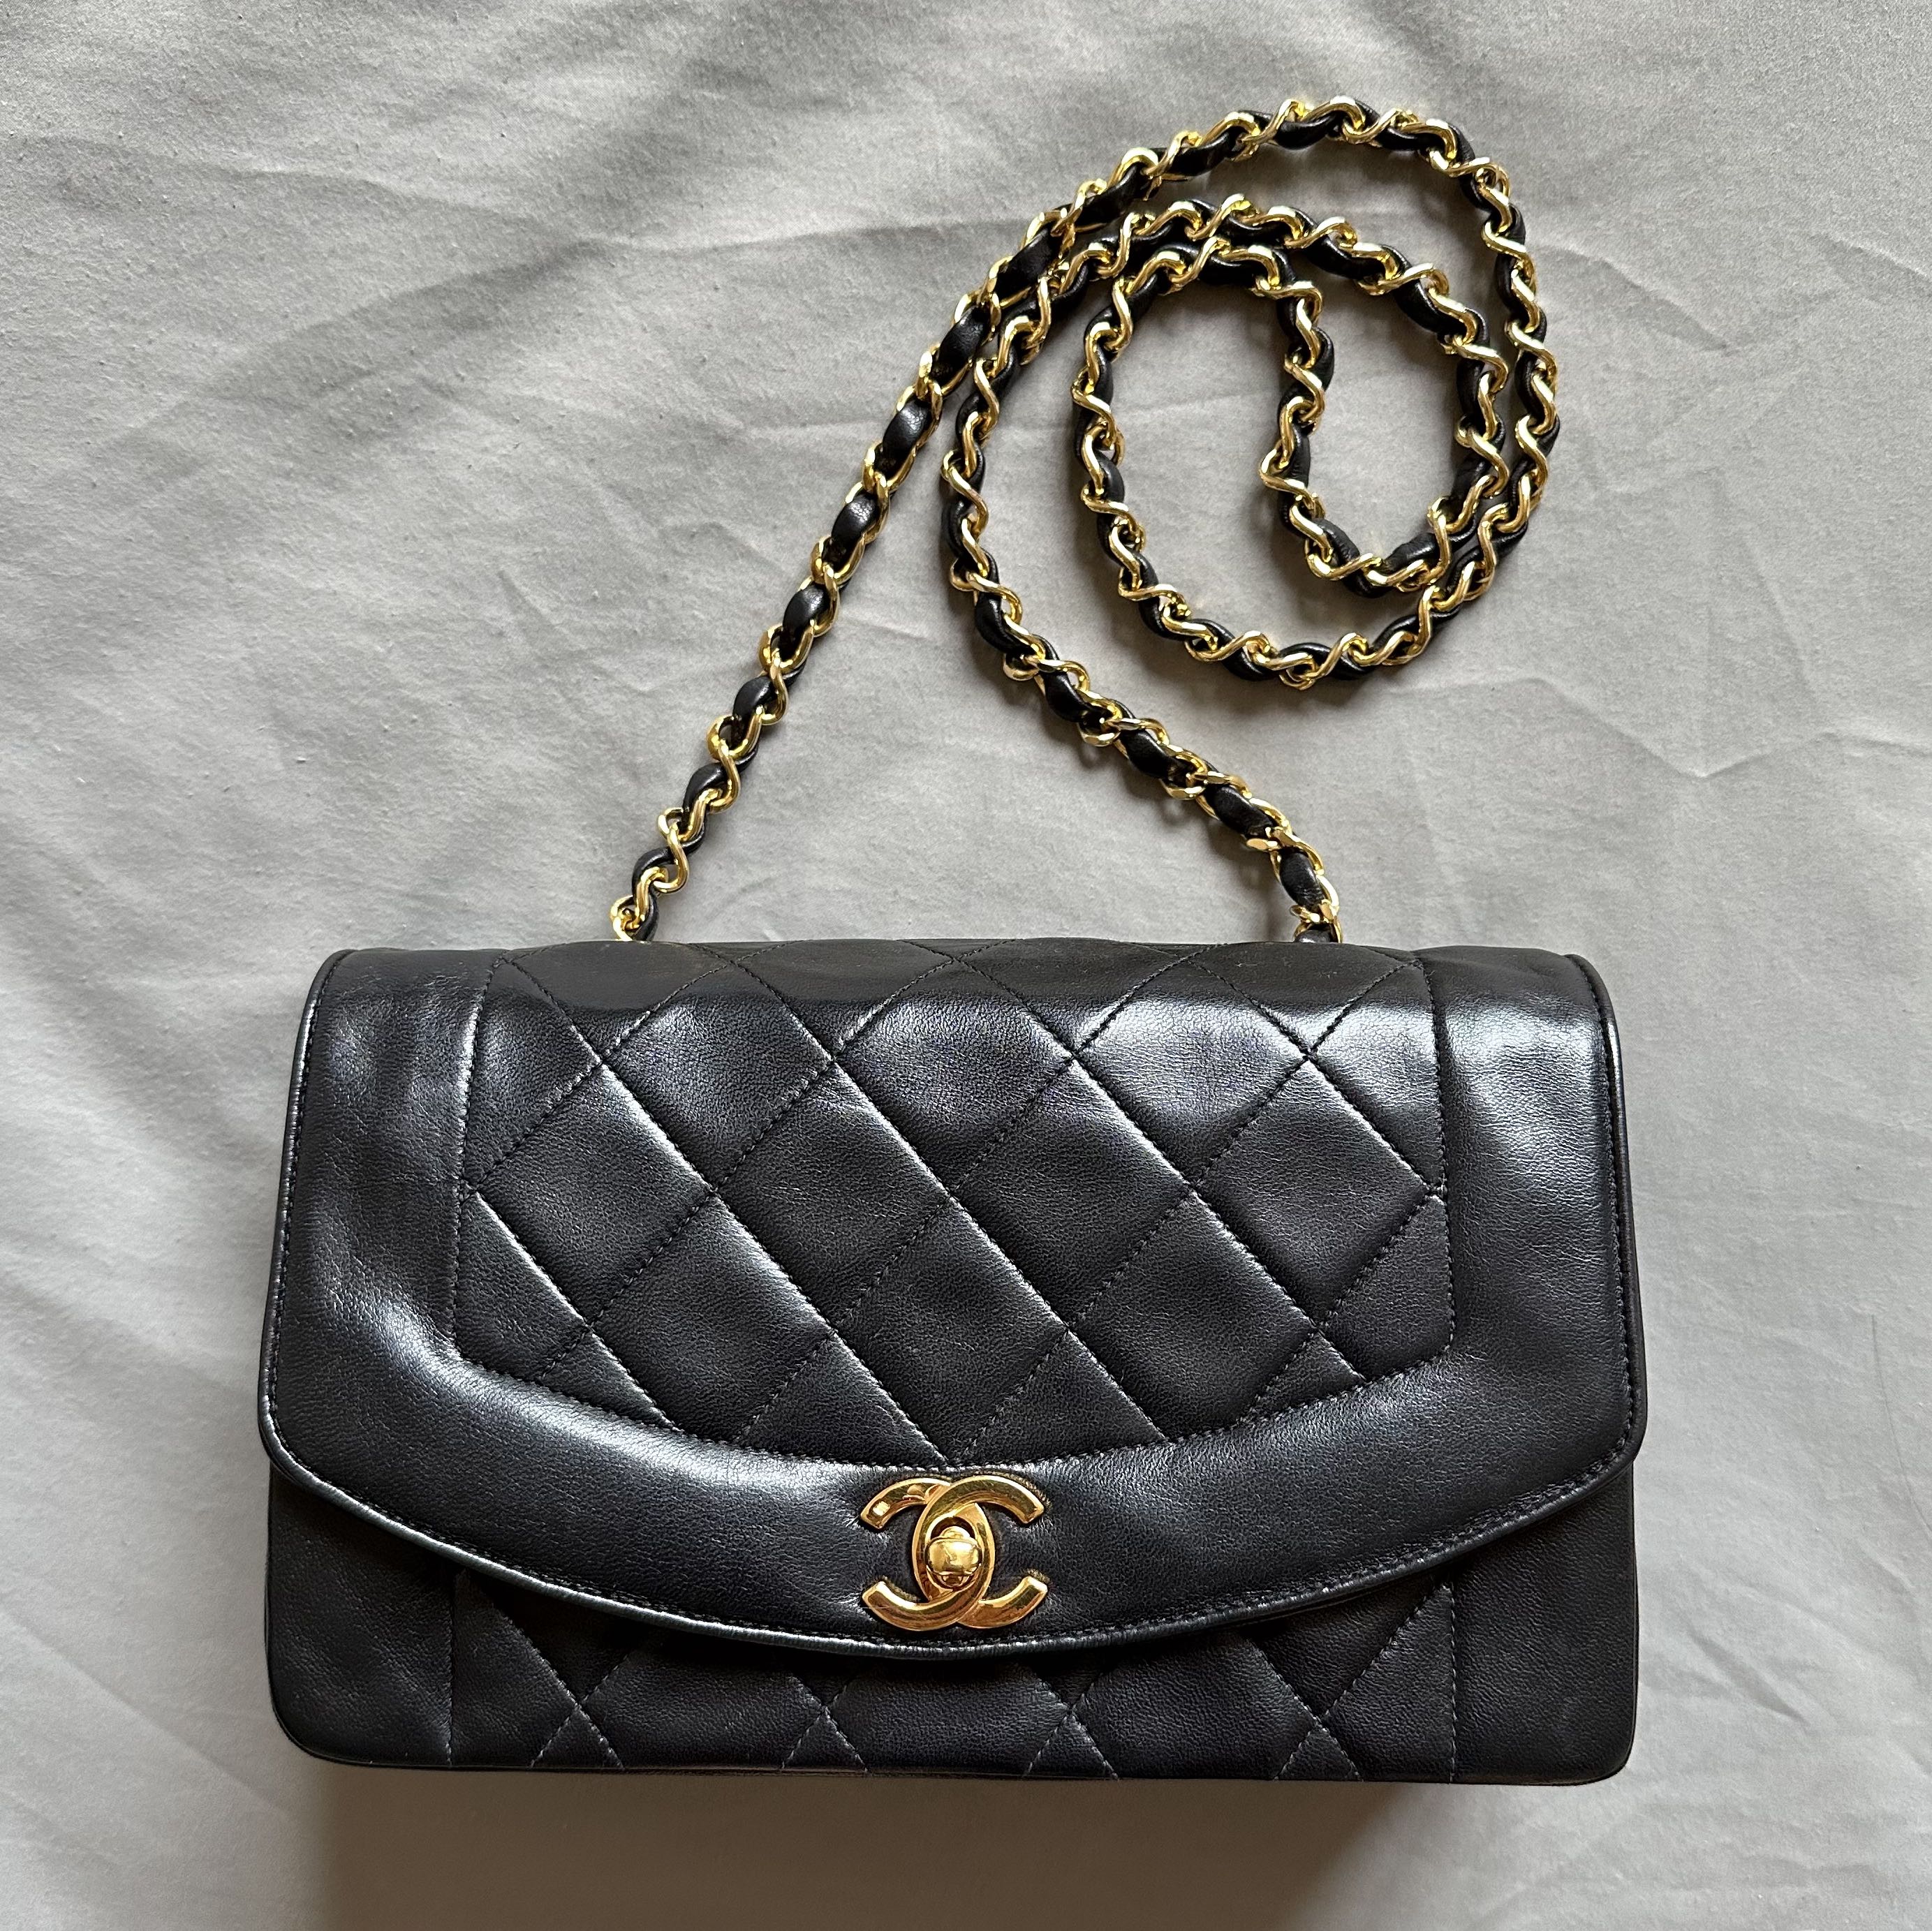 CHANEL Vintage Small Diana Jersey Flap Bag - A Retro Tale